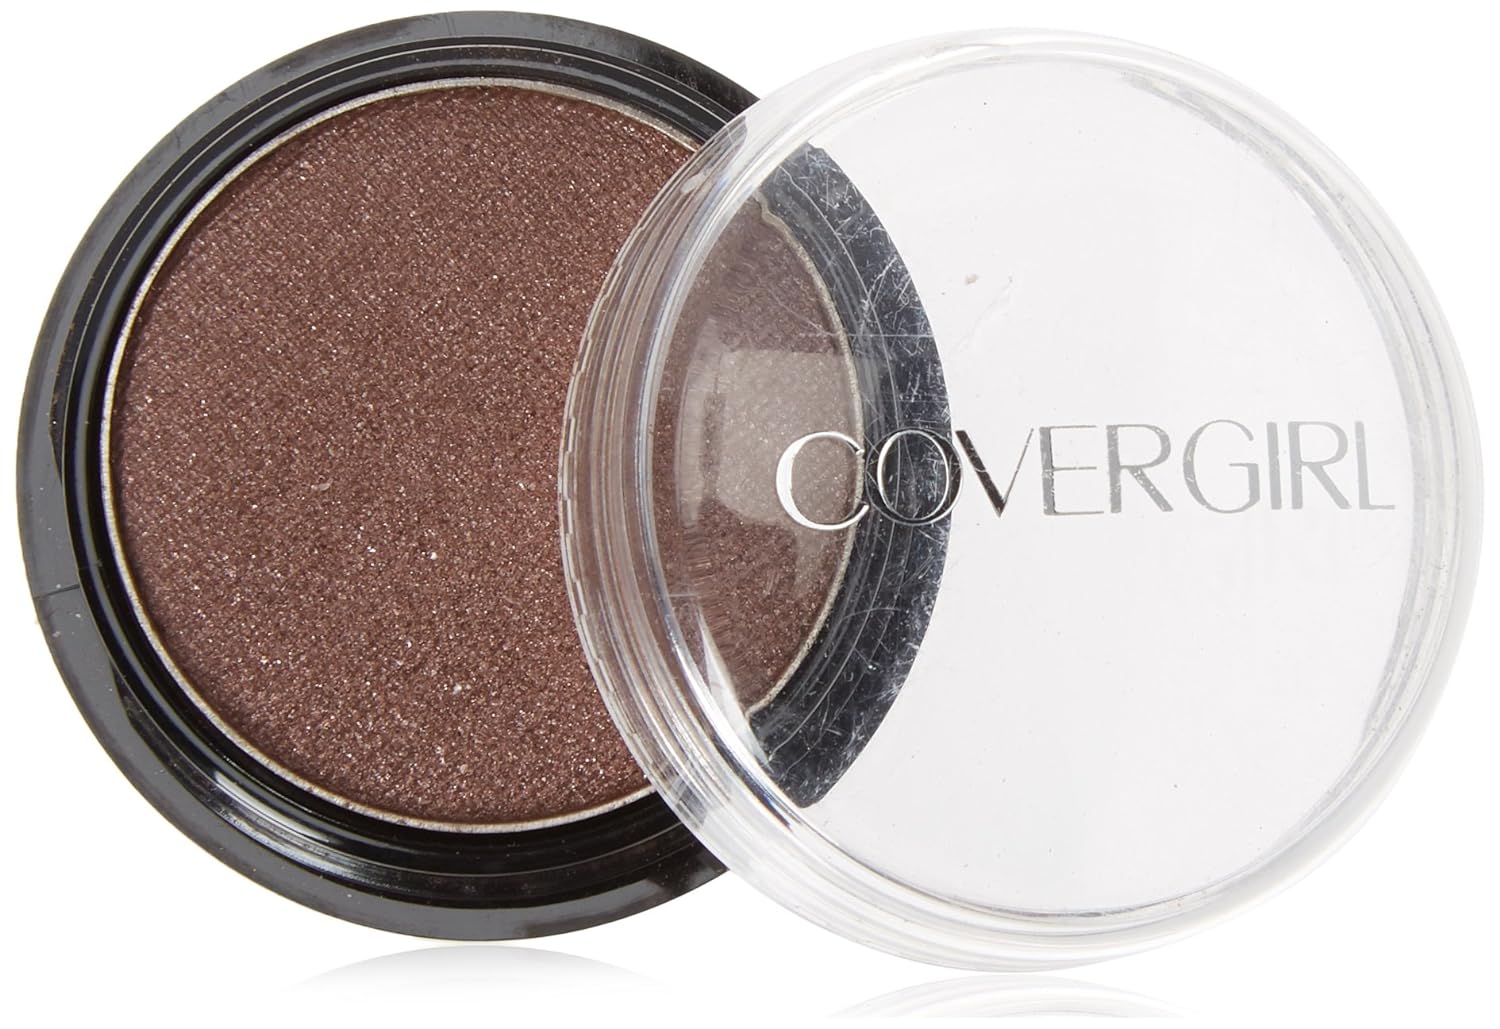 CoverGirl amed Out Shadow Pot, Scorching Cocoa 355 - Pack of 2